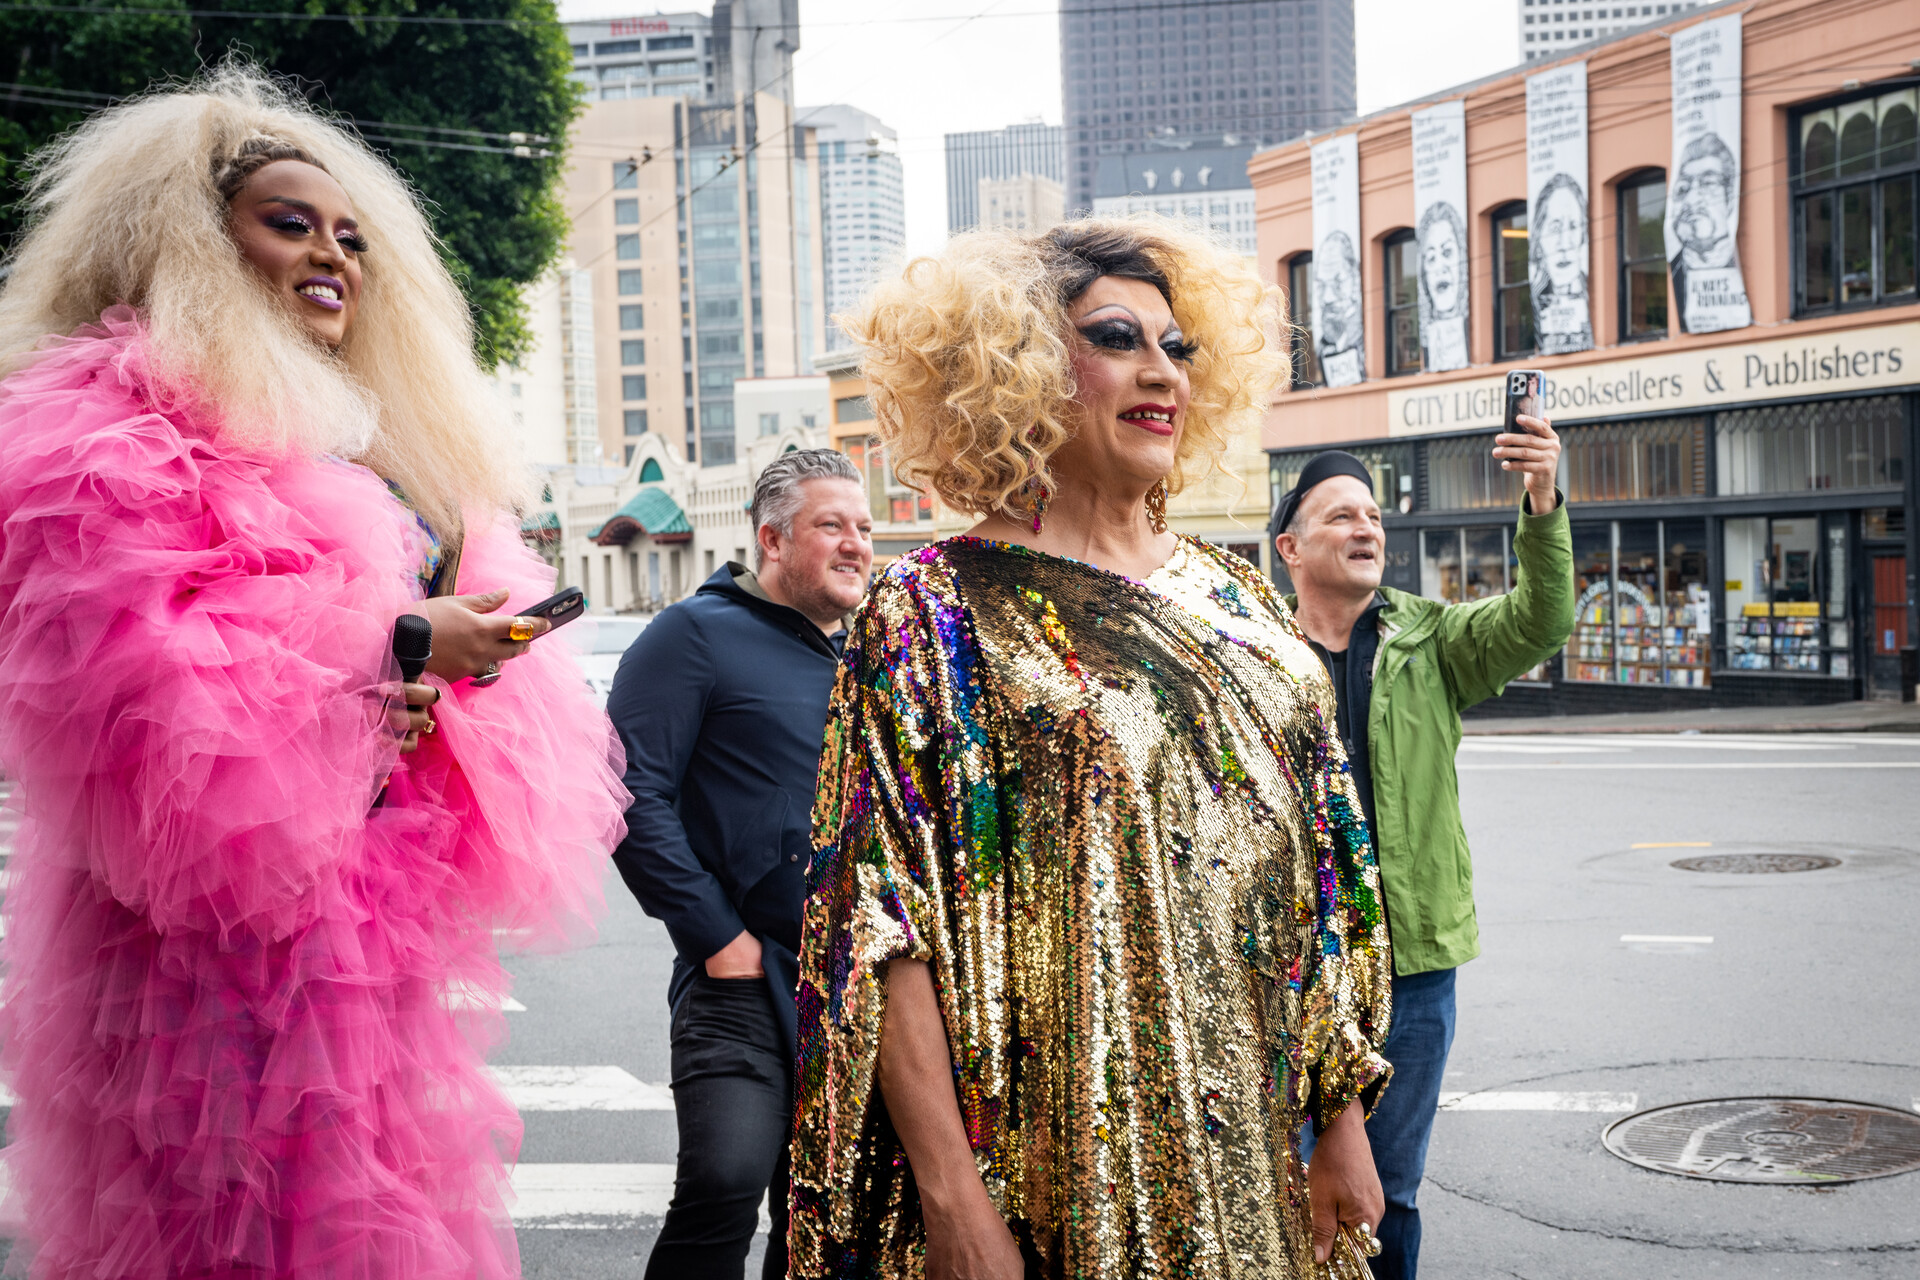 Two drag artists watch and smile on a street corner with some people in the background.